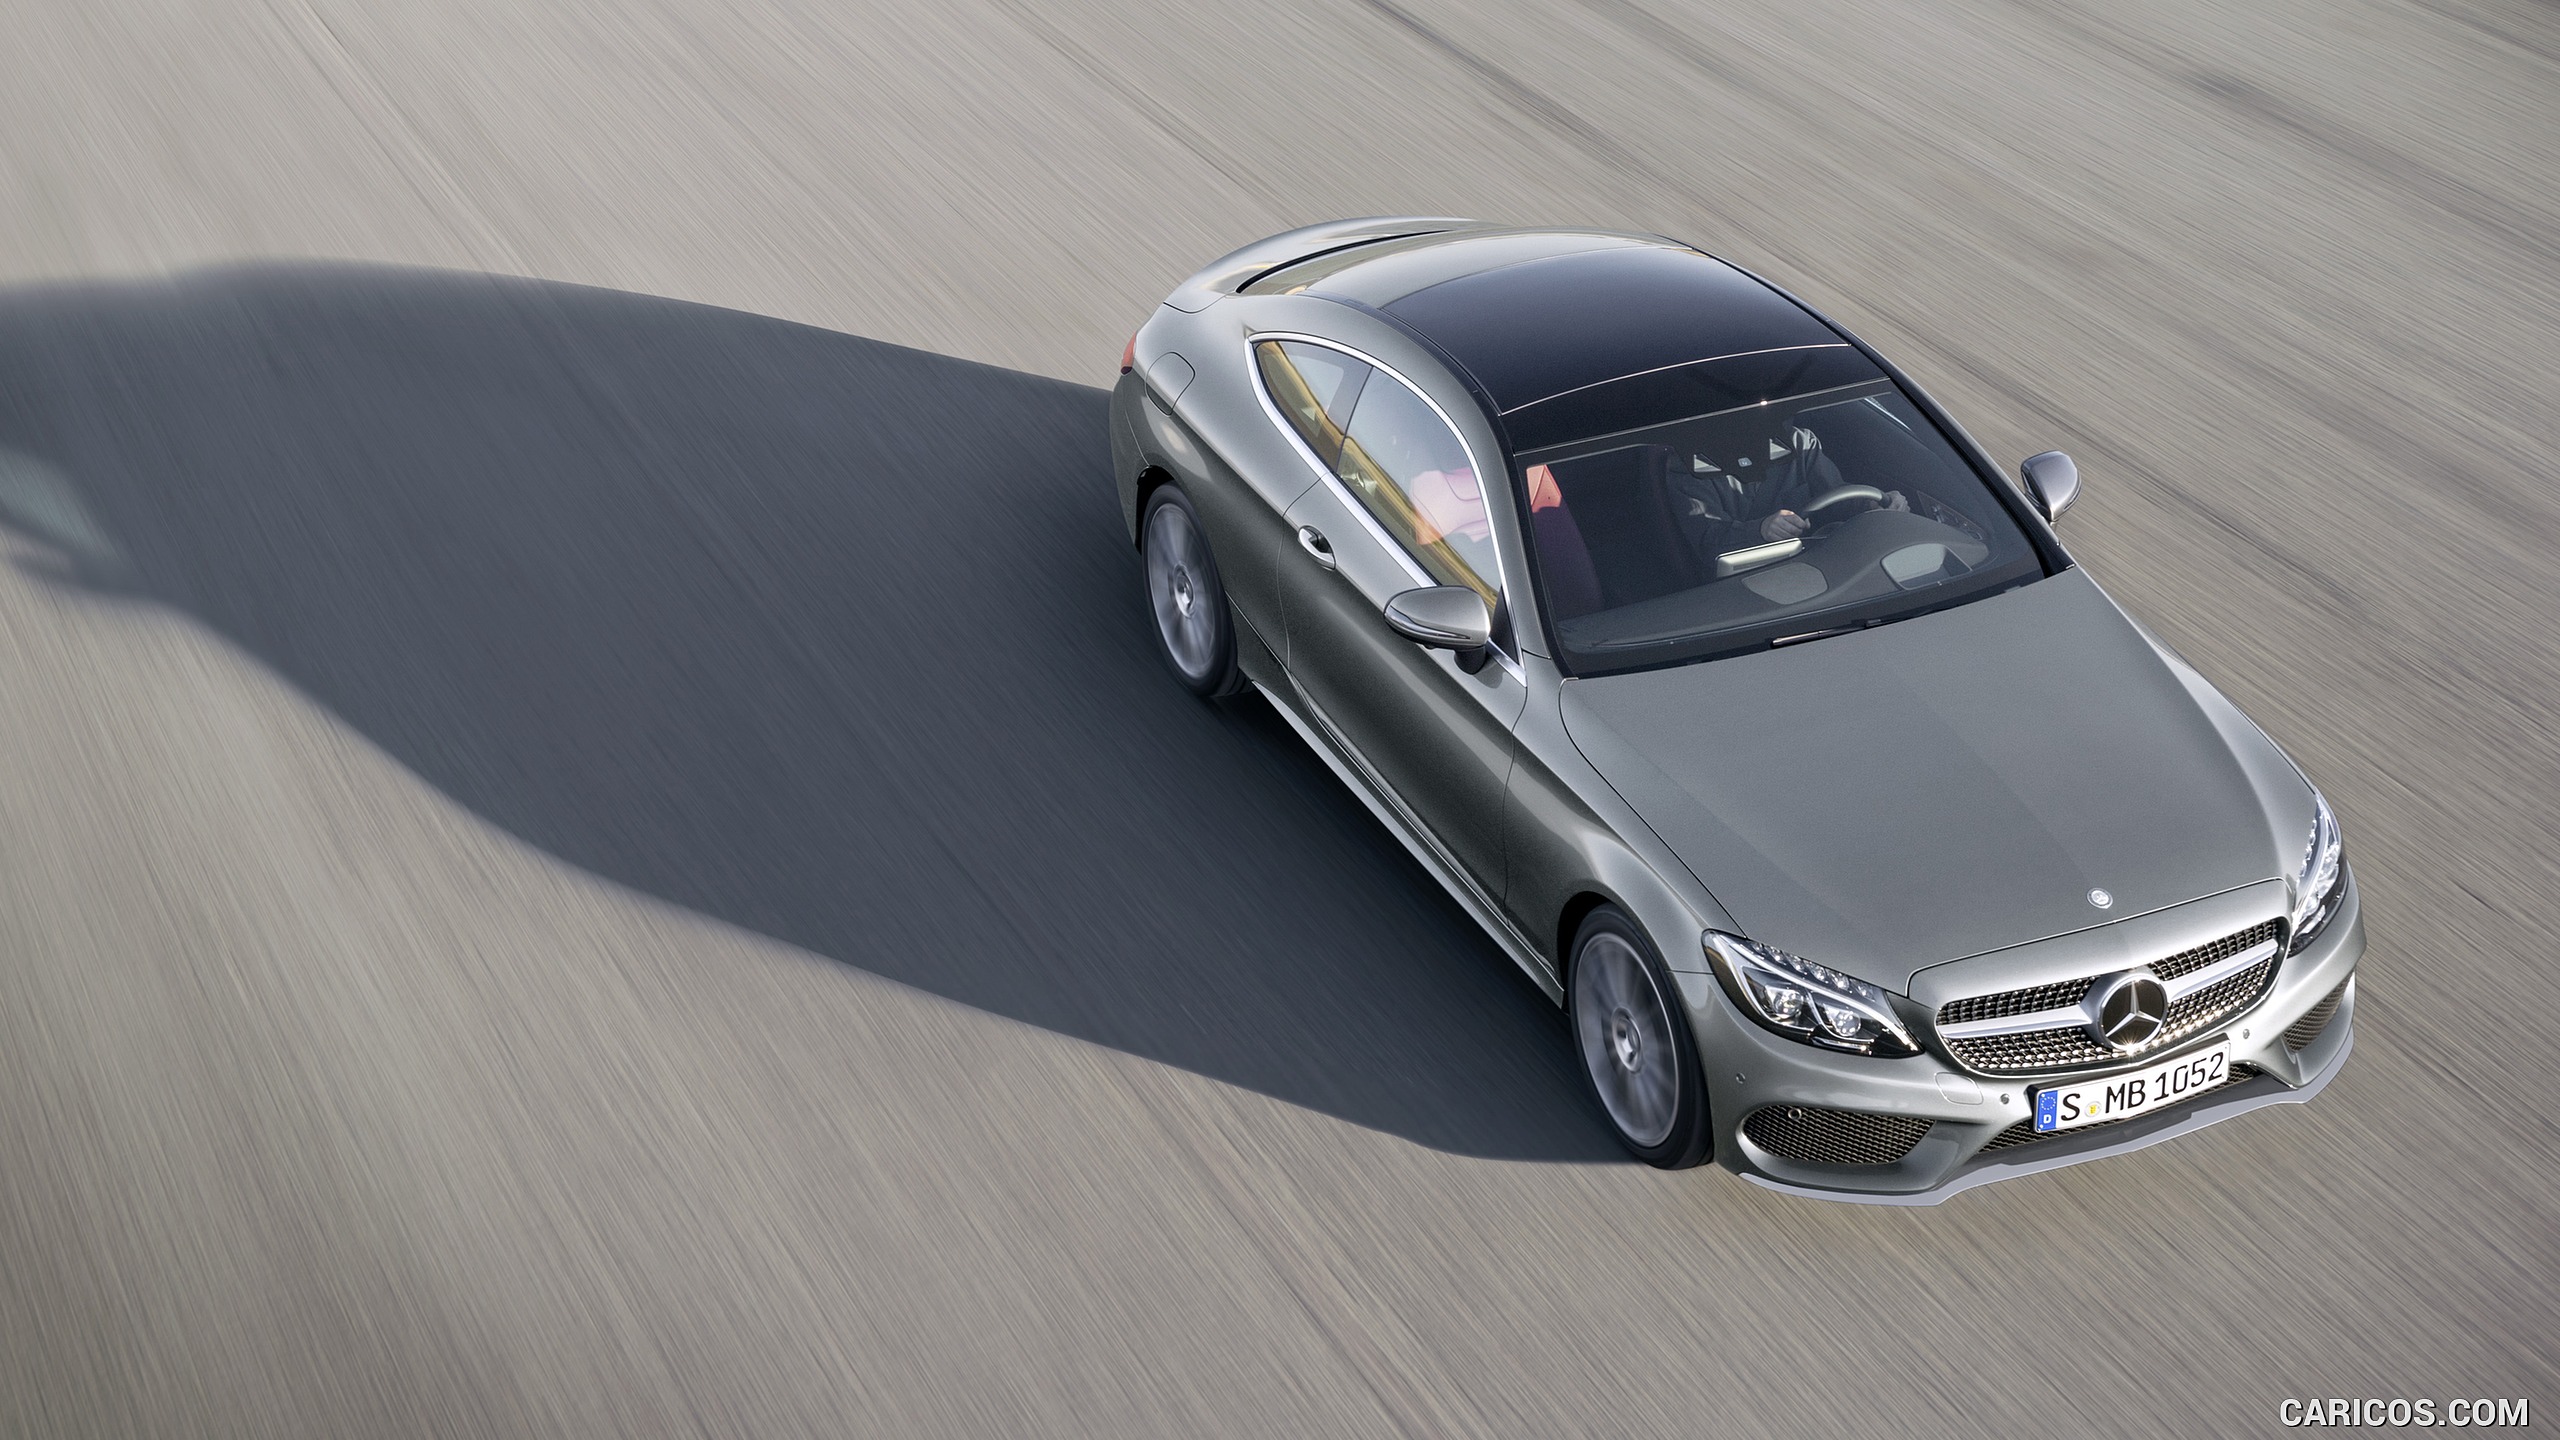 2017 Mercedes-Benz C-Class Coupe C300 (Selenit Grey) - Top, #62 of 210